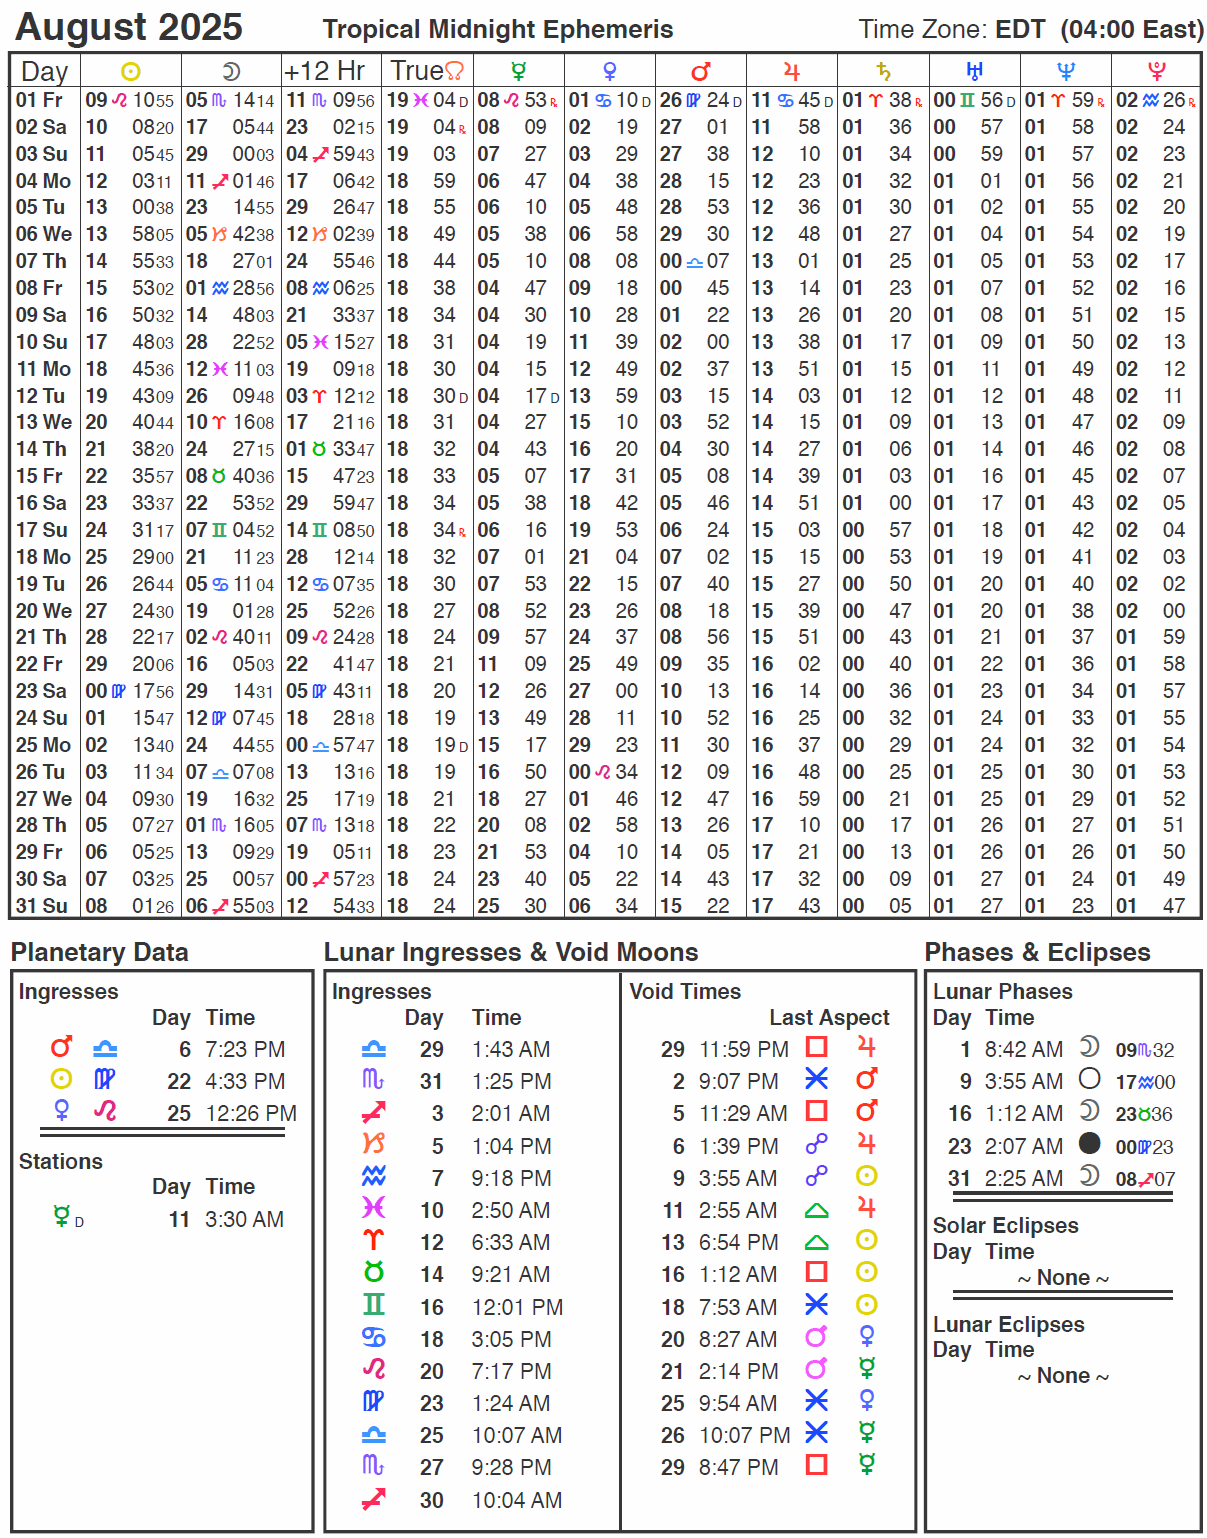 August 2025 Ephemeris with Daily Planetary Positions